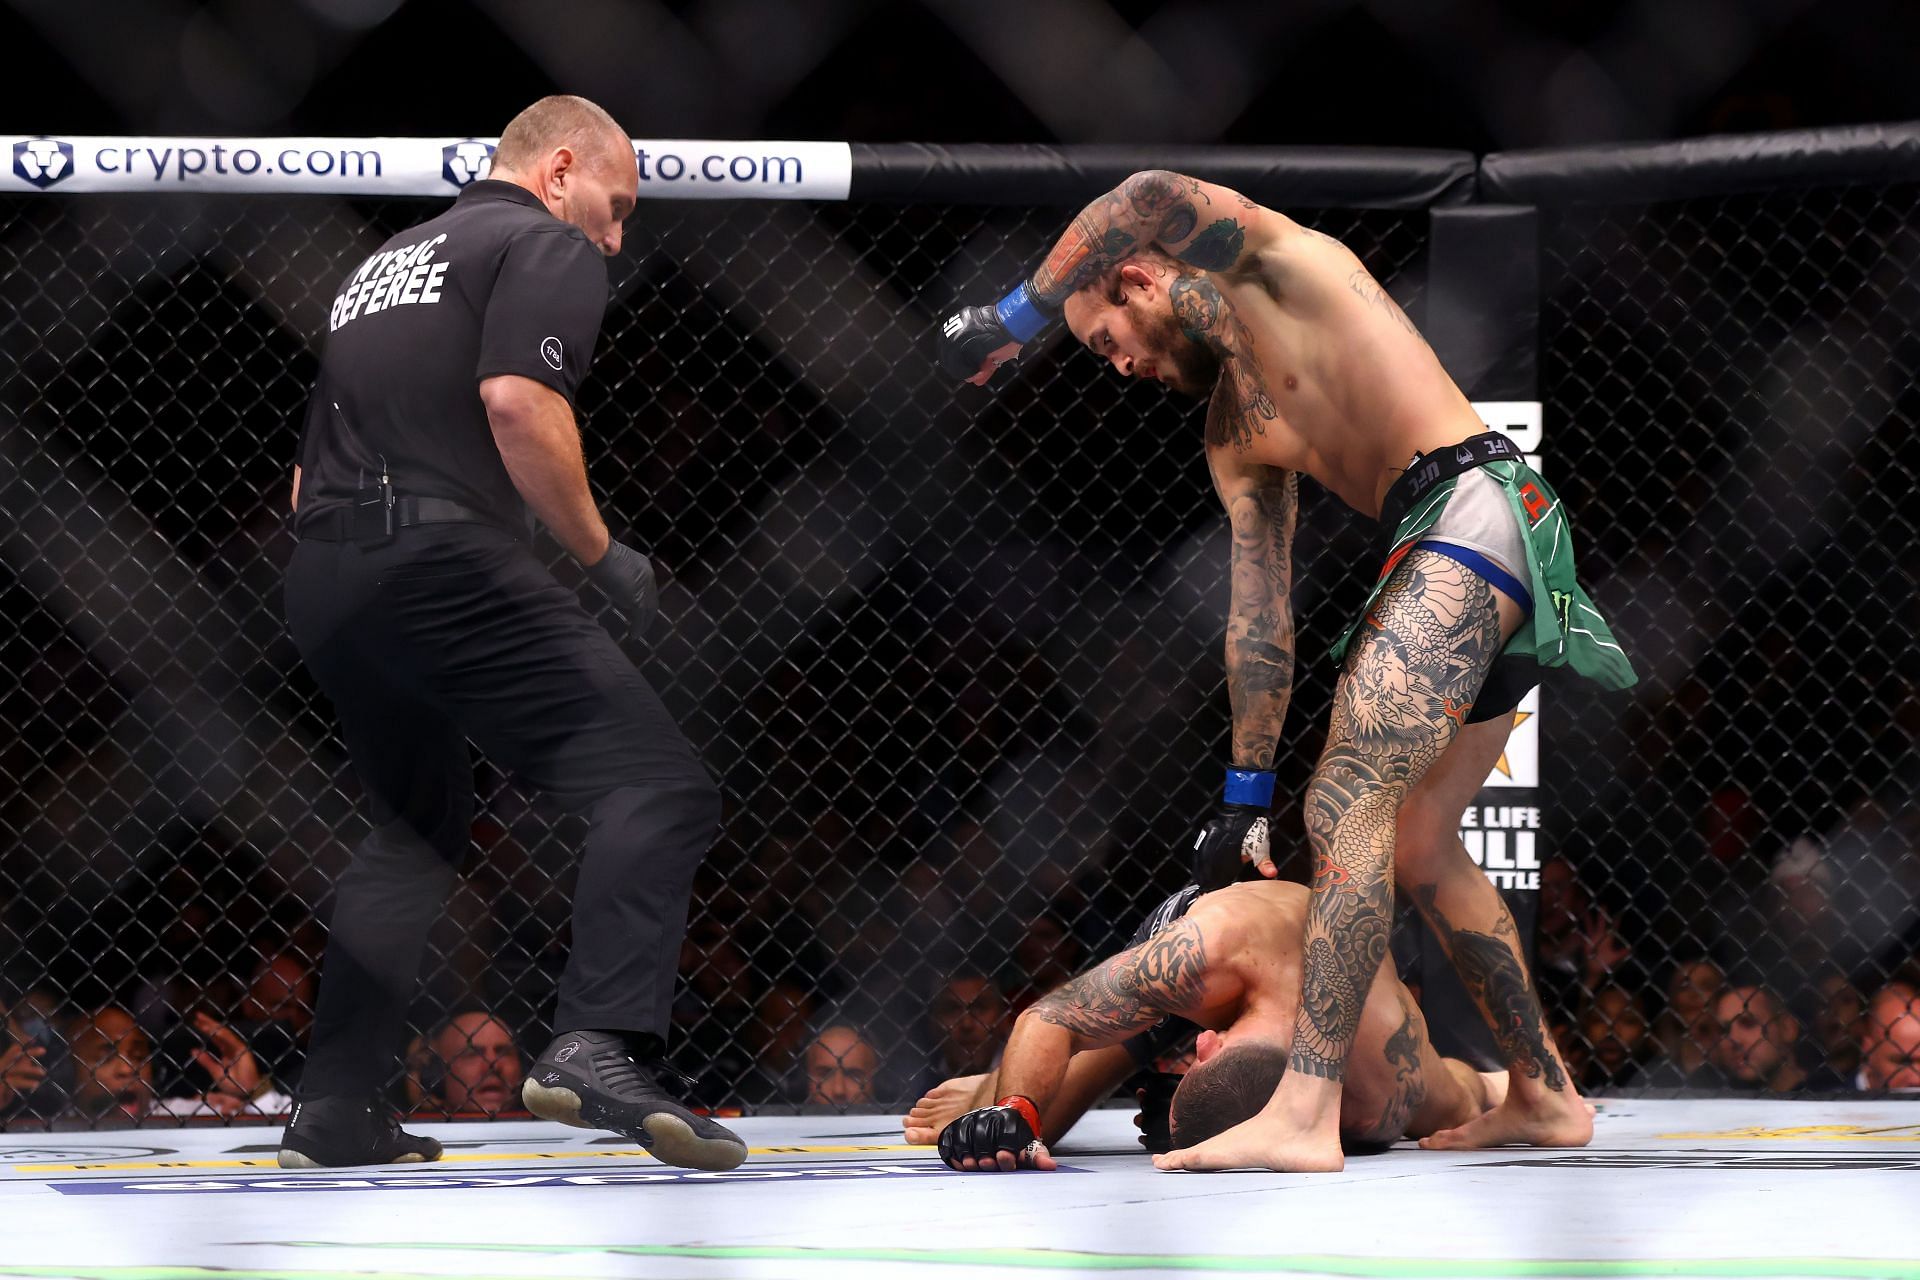 Marlon Vera should now be considered a genuine title contender thanks to his win over Frankie Edgar